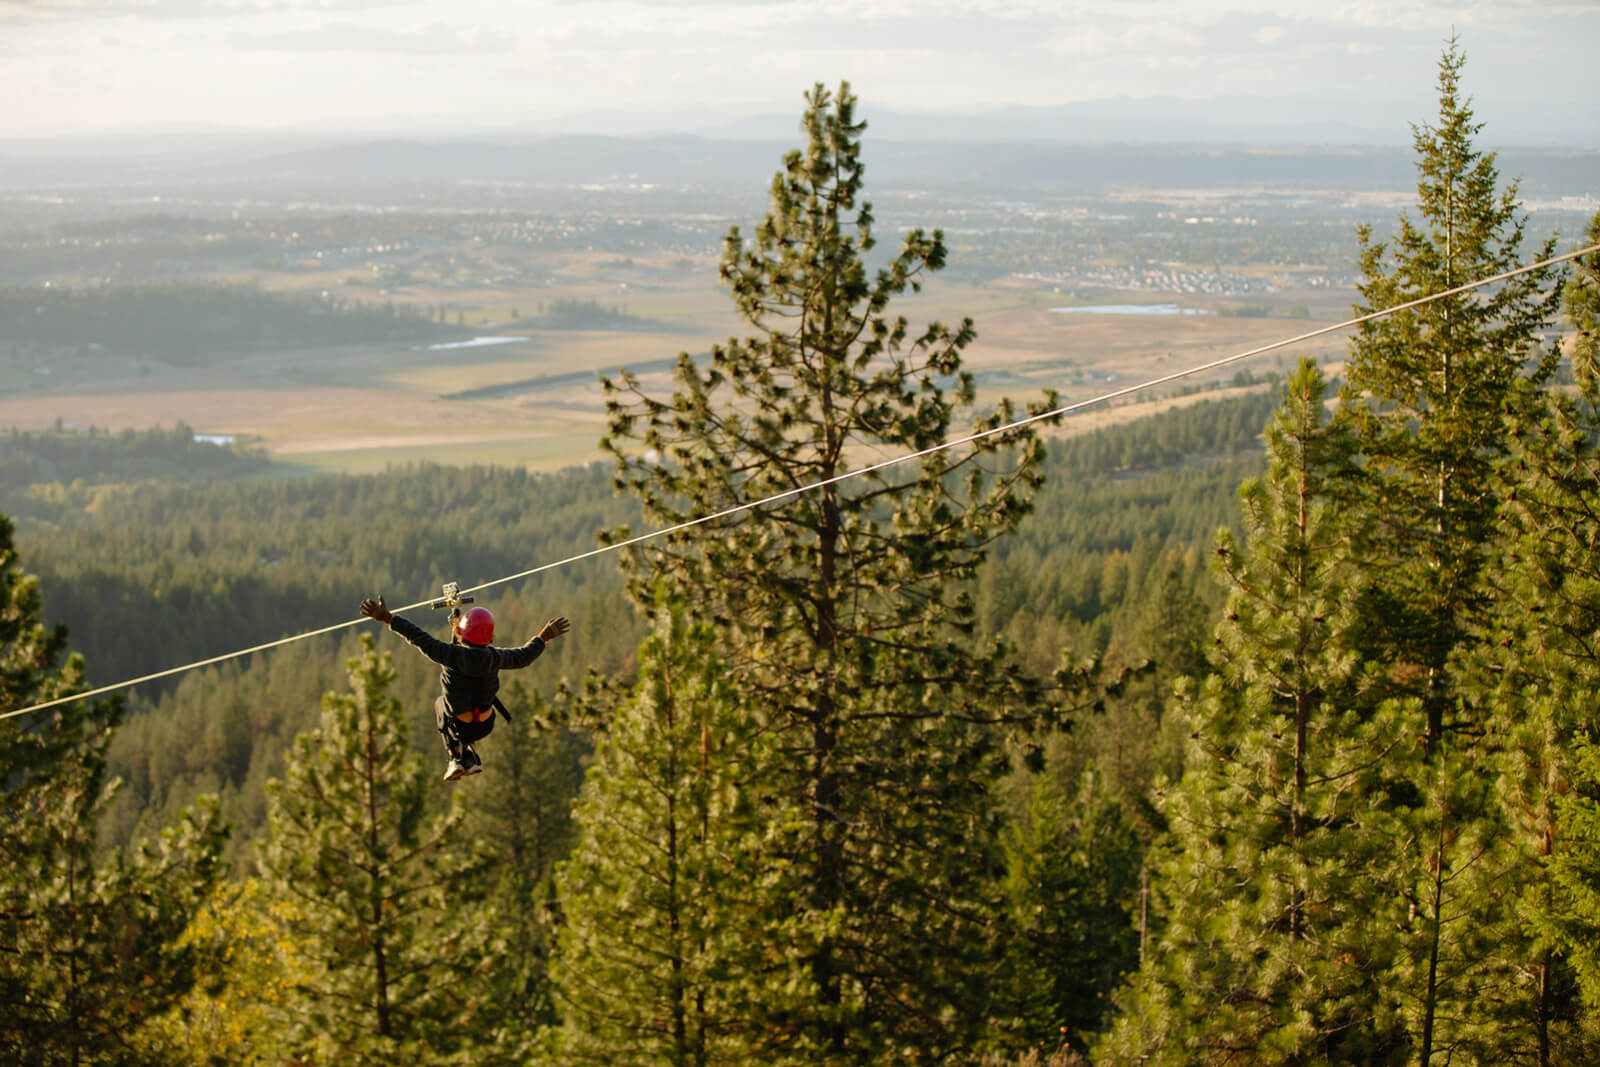 A kid ziplines above a tree-covered valley.